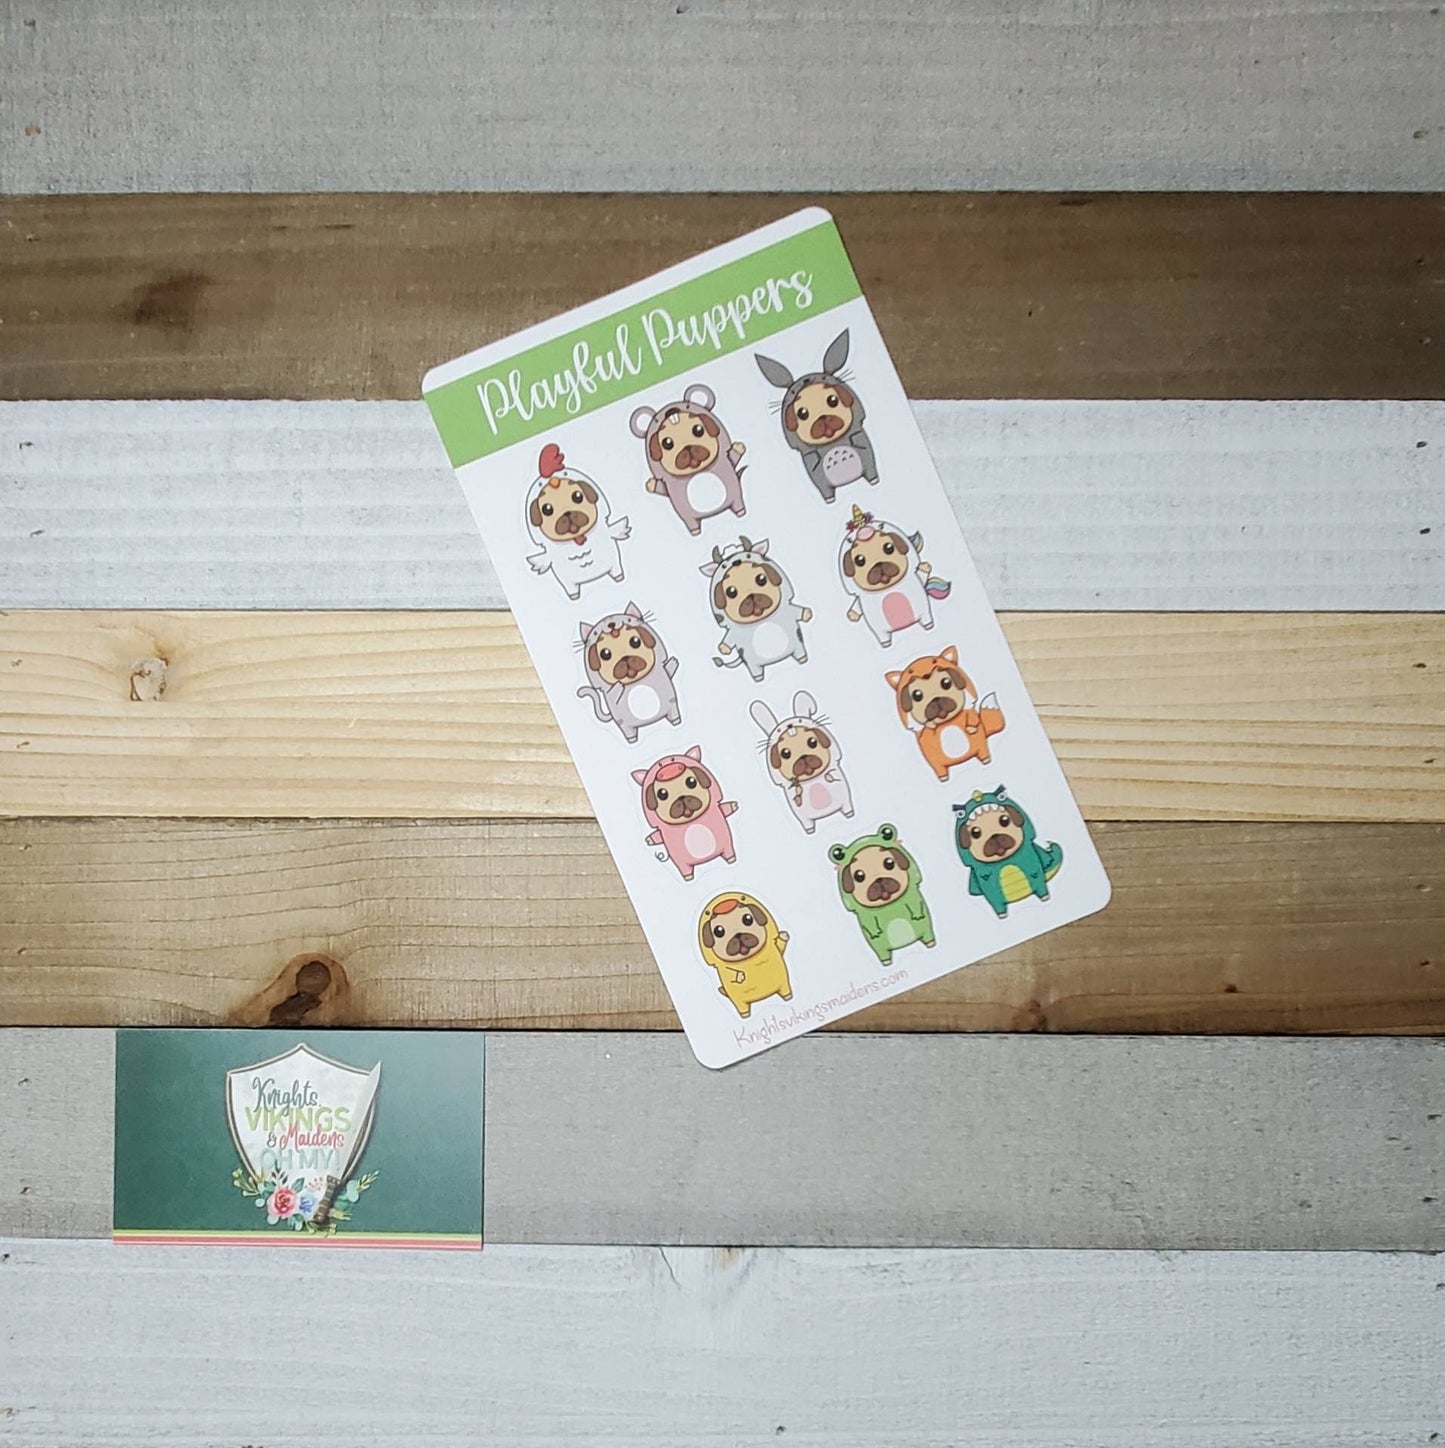 Playful Puppies Sticker Sheet, Puppy, Comfy, Costume Sticker, Bullet Journal, Planning Stickers, Animal, Dog Stickers, Dogs Dressed Up